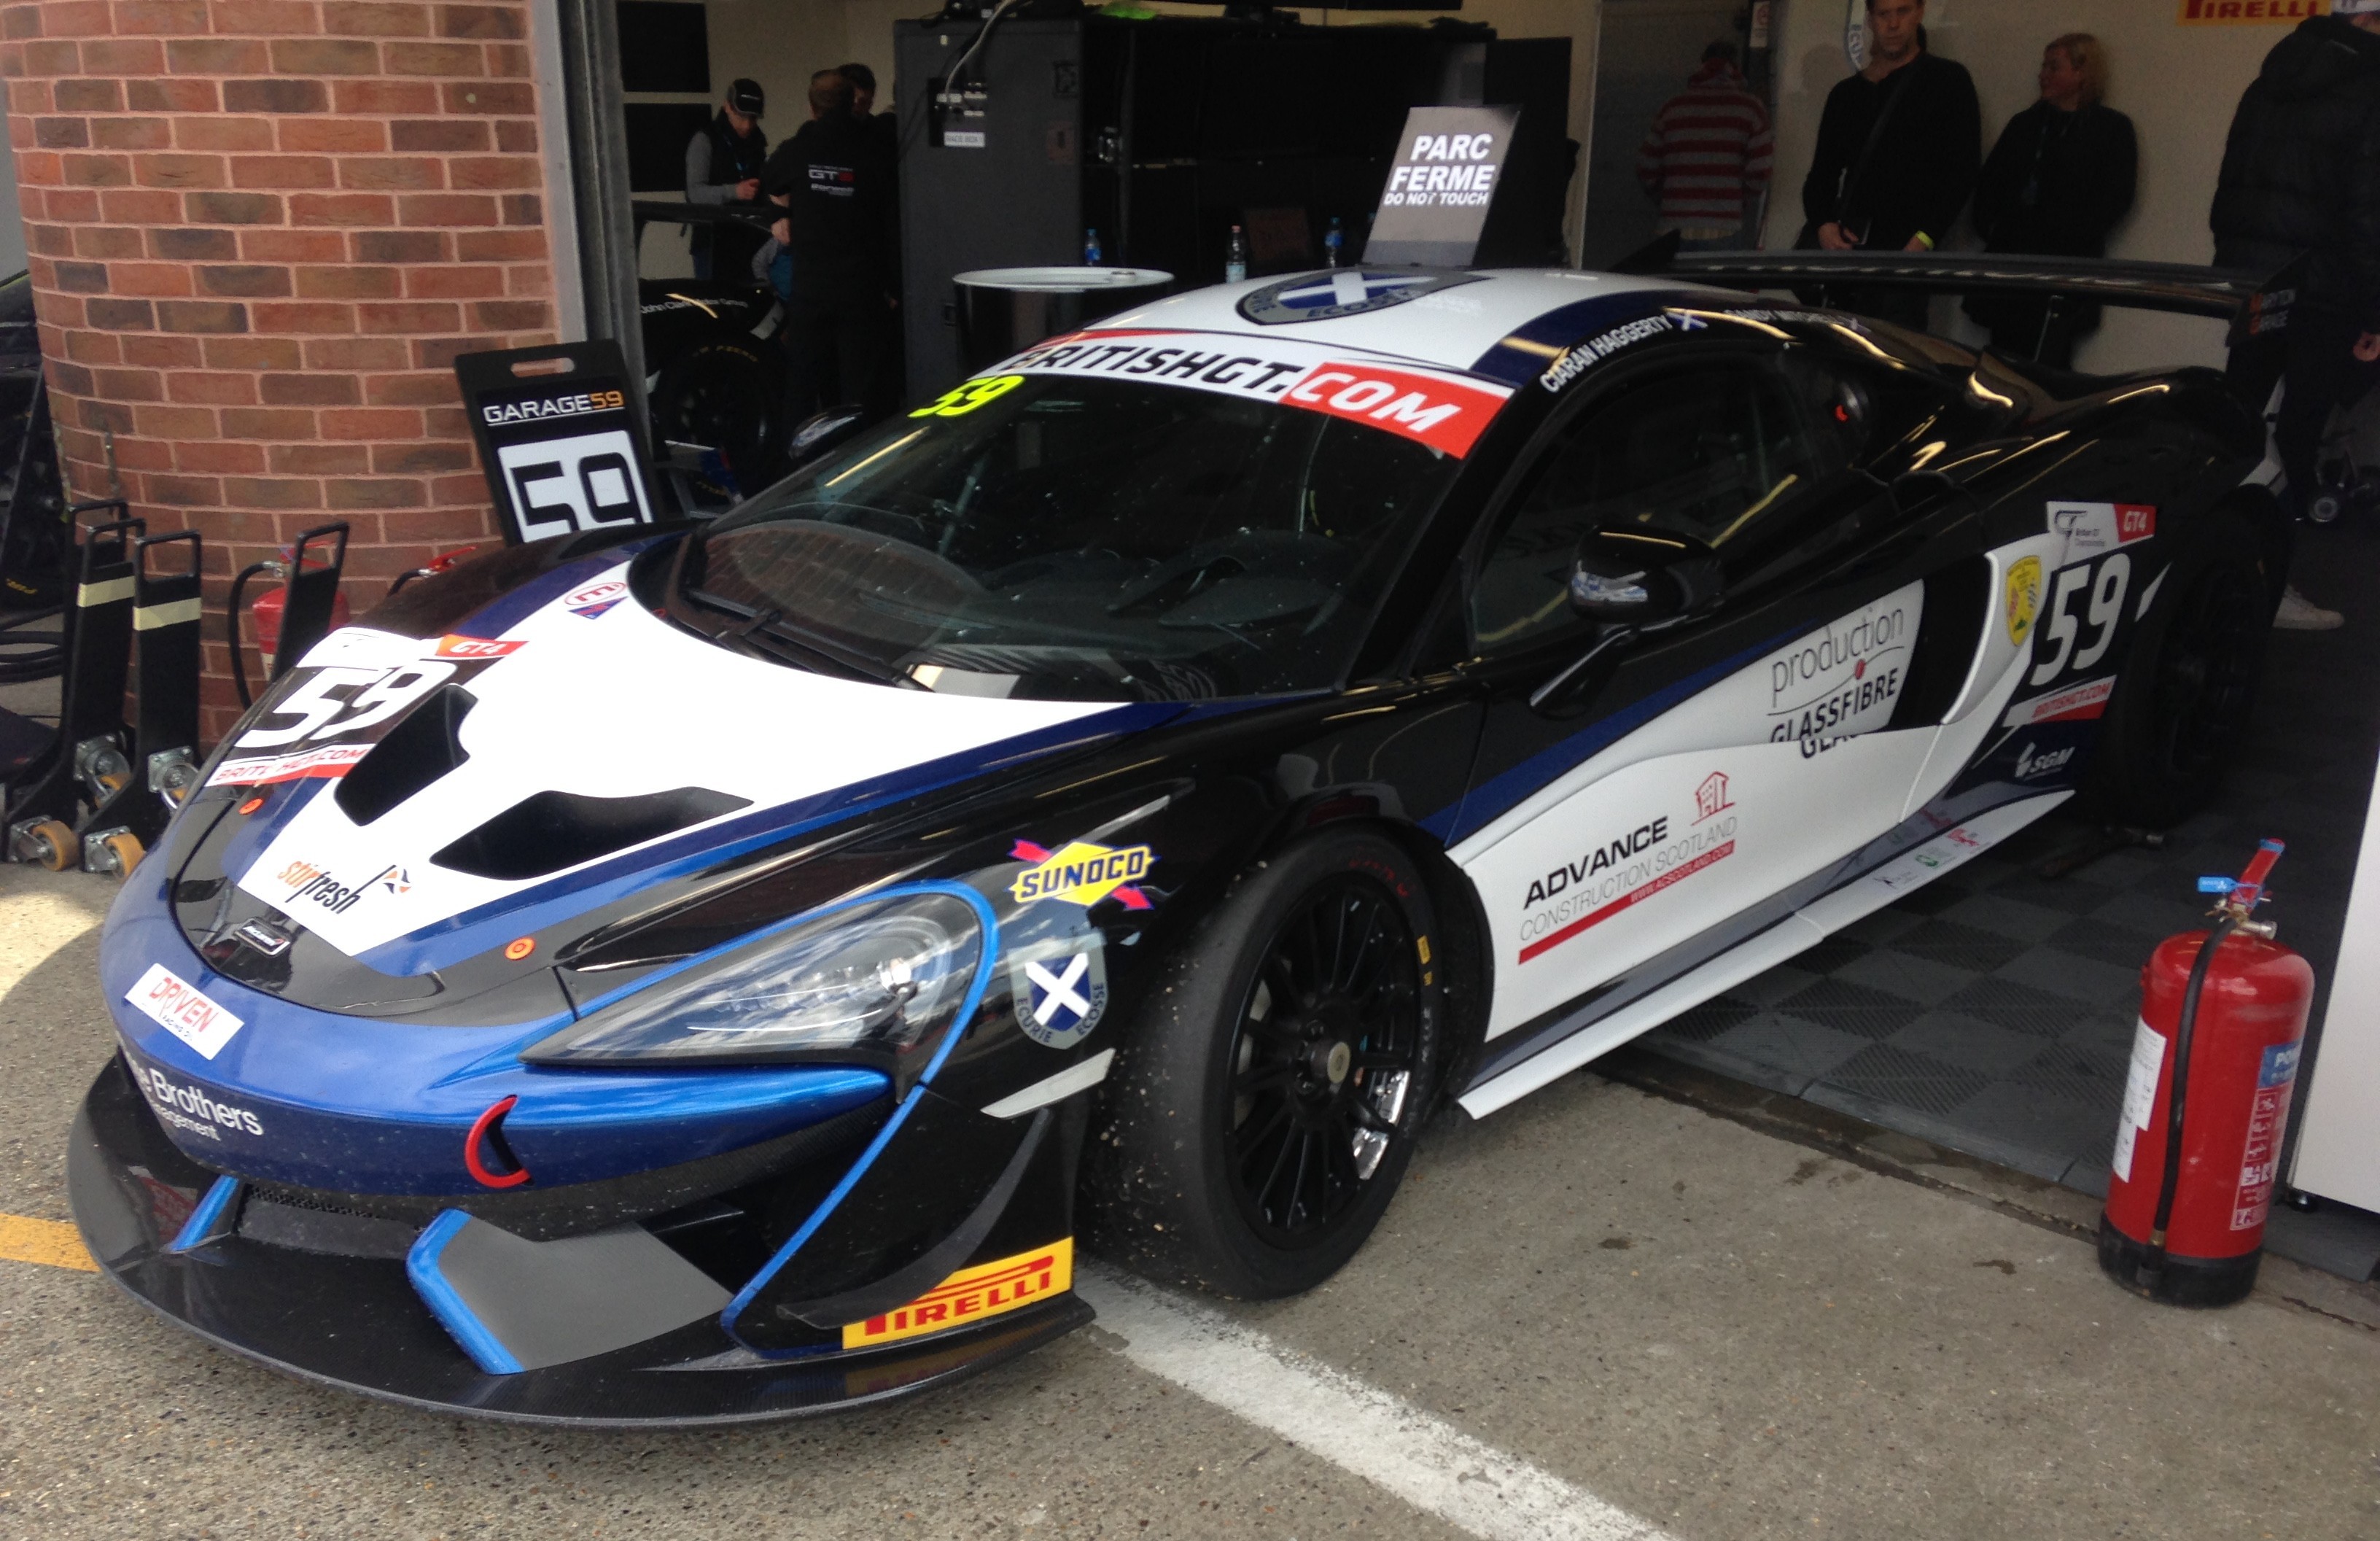 ngus youngster Sandy Mitchell and fellow Scot Ciaran Haggerty gave the new Black Bull Ecurie Ecosse McLaren 570S GT4 its global race baptism and brought the machine home sixth in the GT4 field.